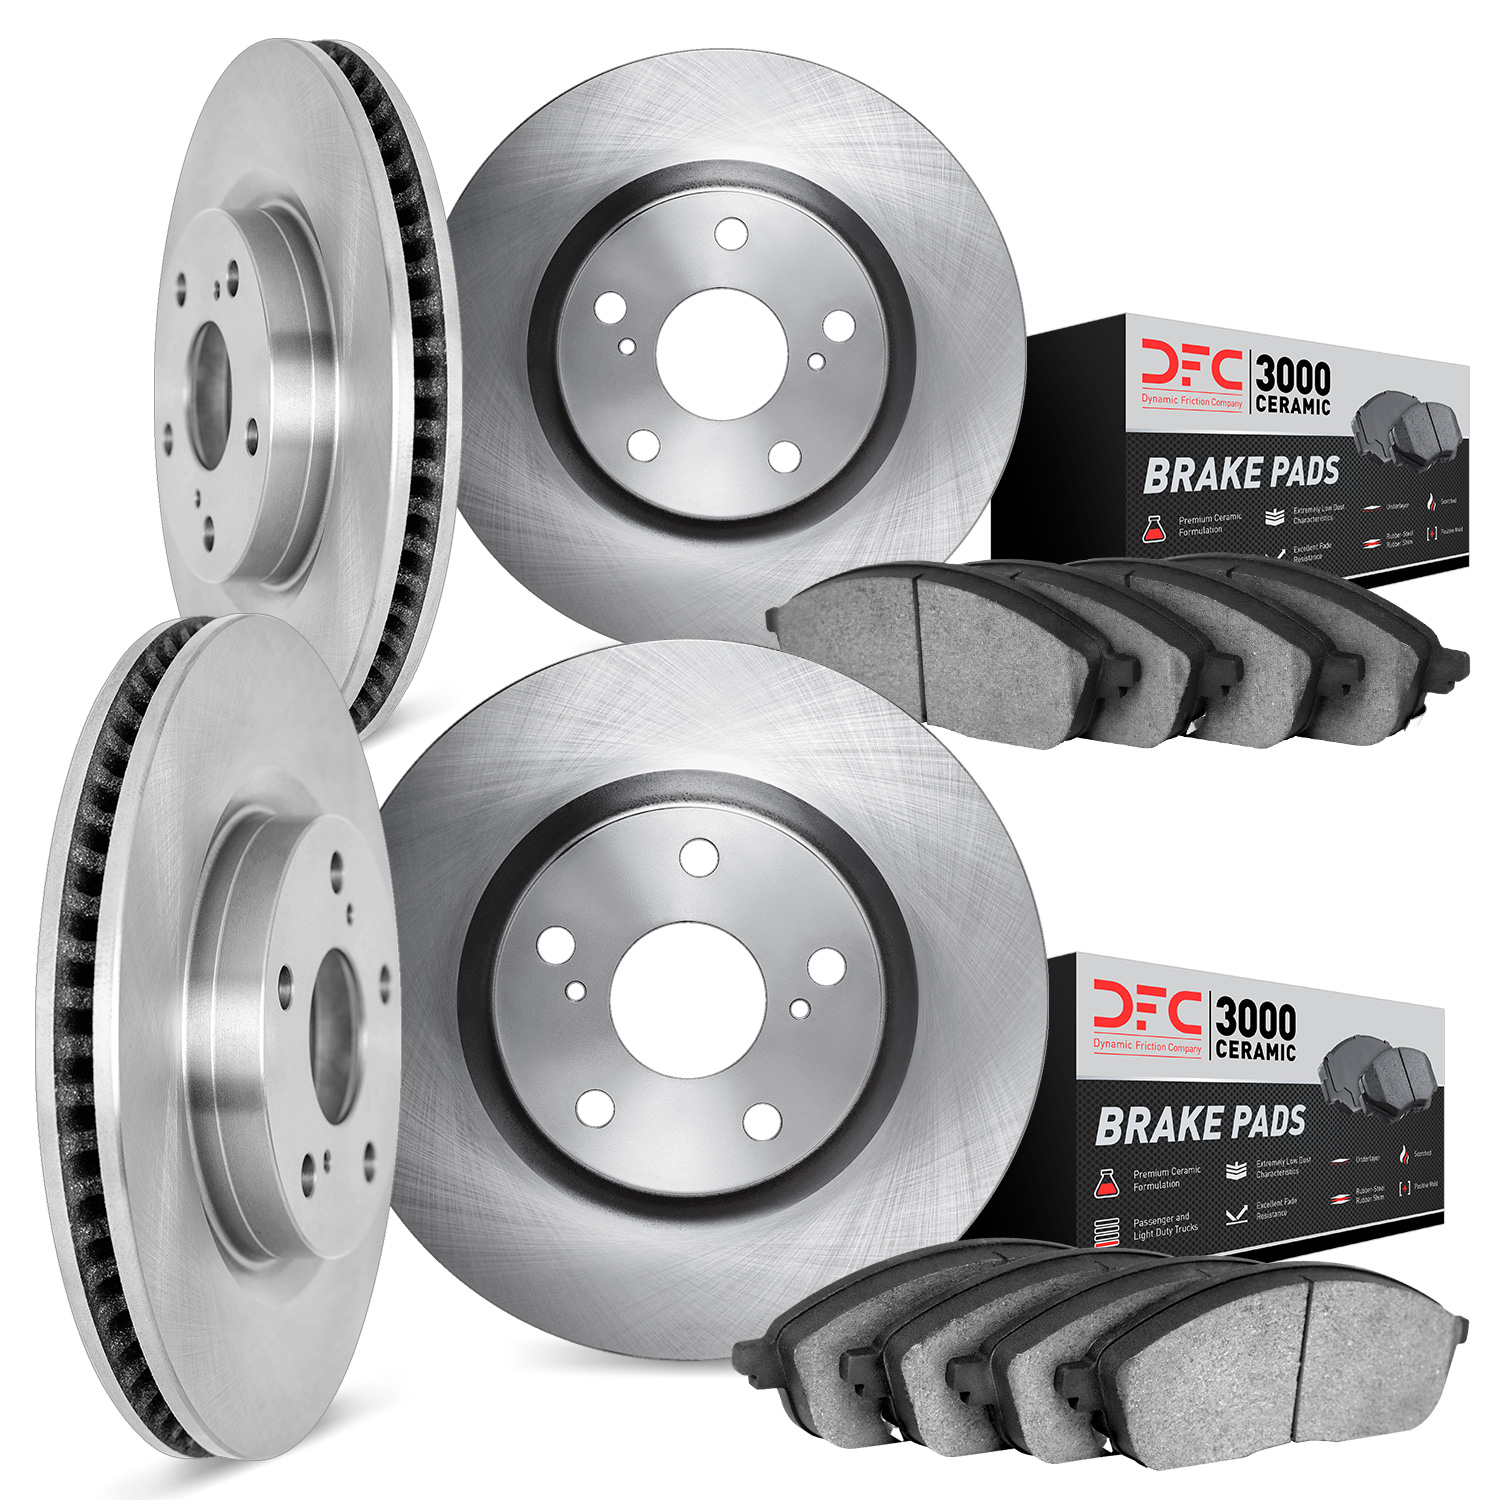 6304-67073 Brake Rotors with 3000-Series Ceramic Brake Pads Kit, Fits Select Infiniti/Nissan, Position: Front and Rear